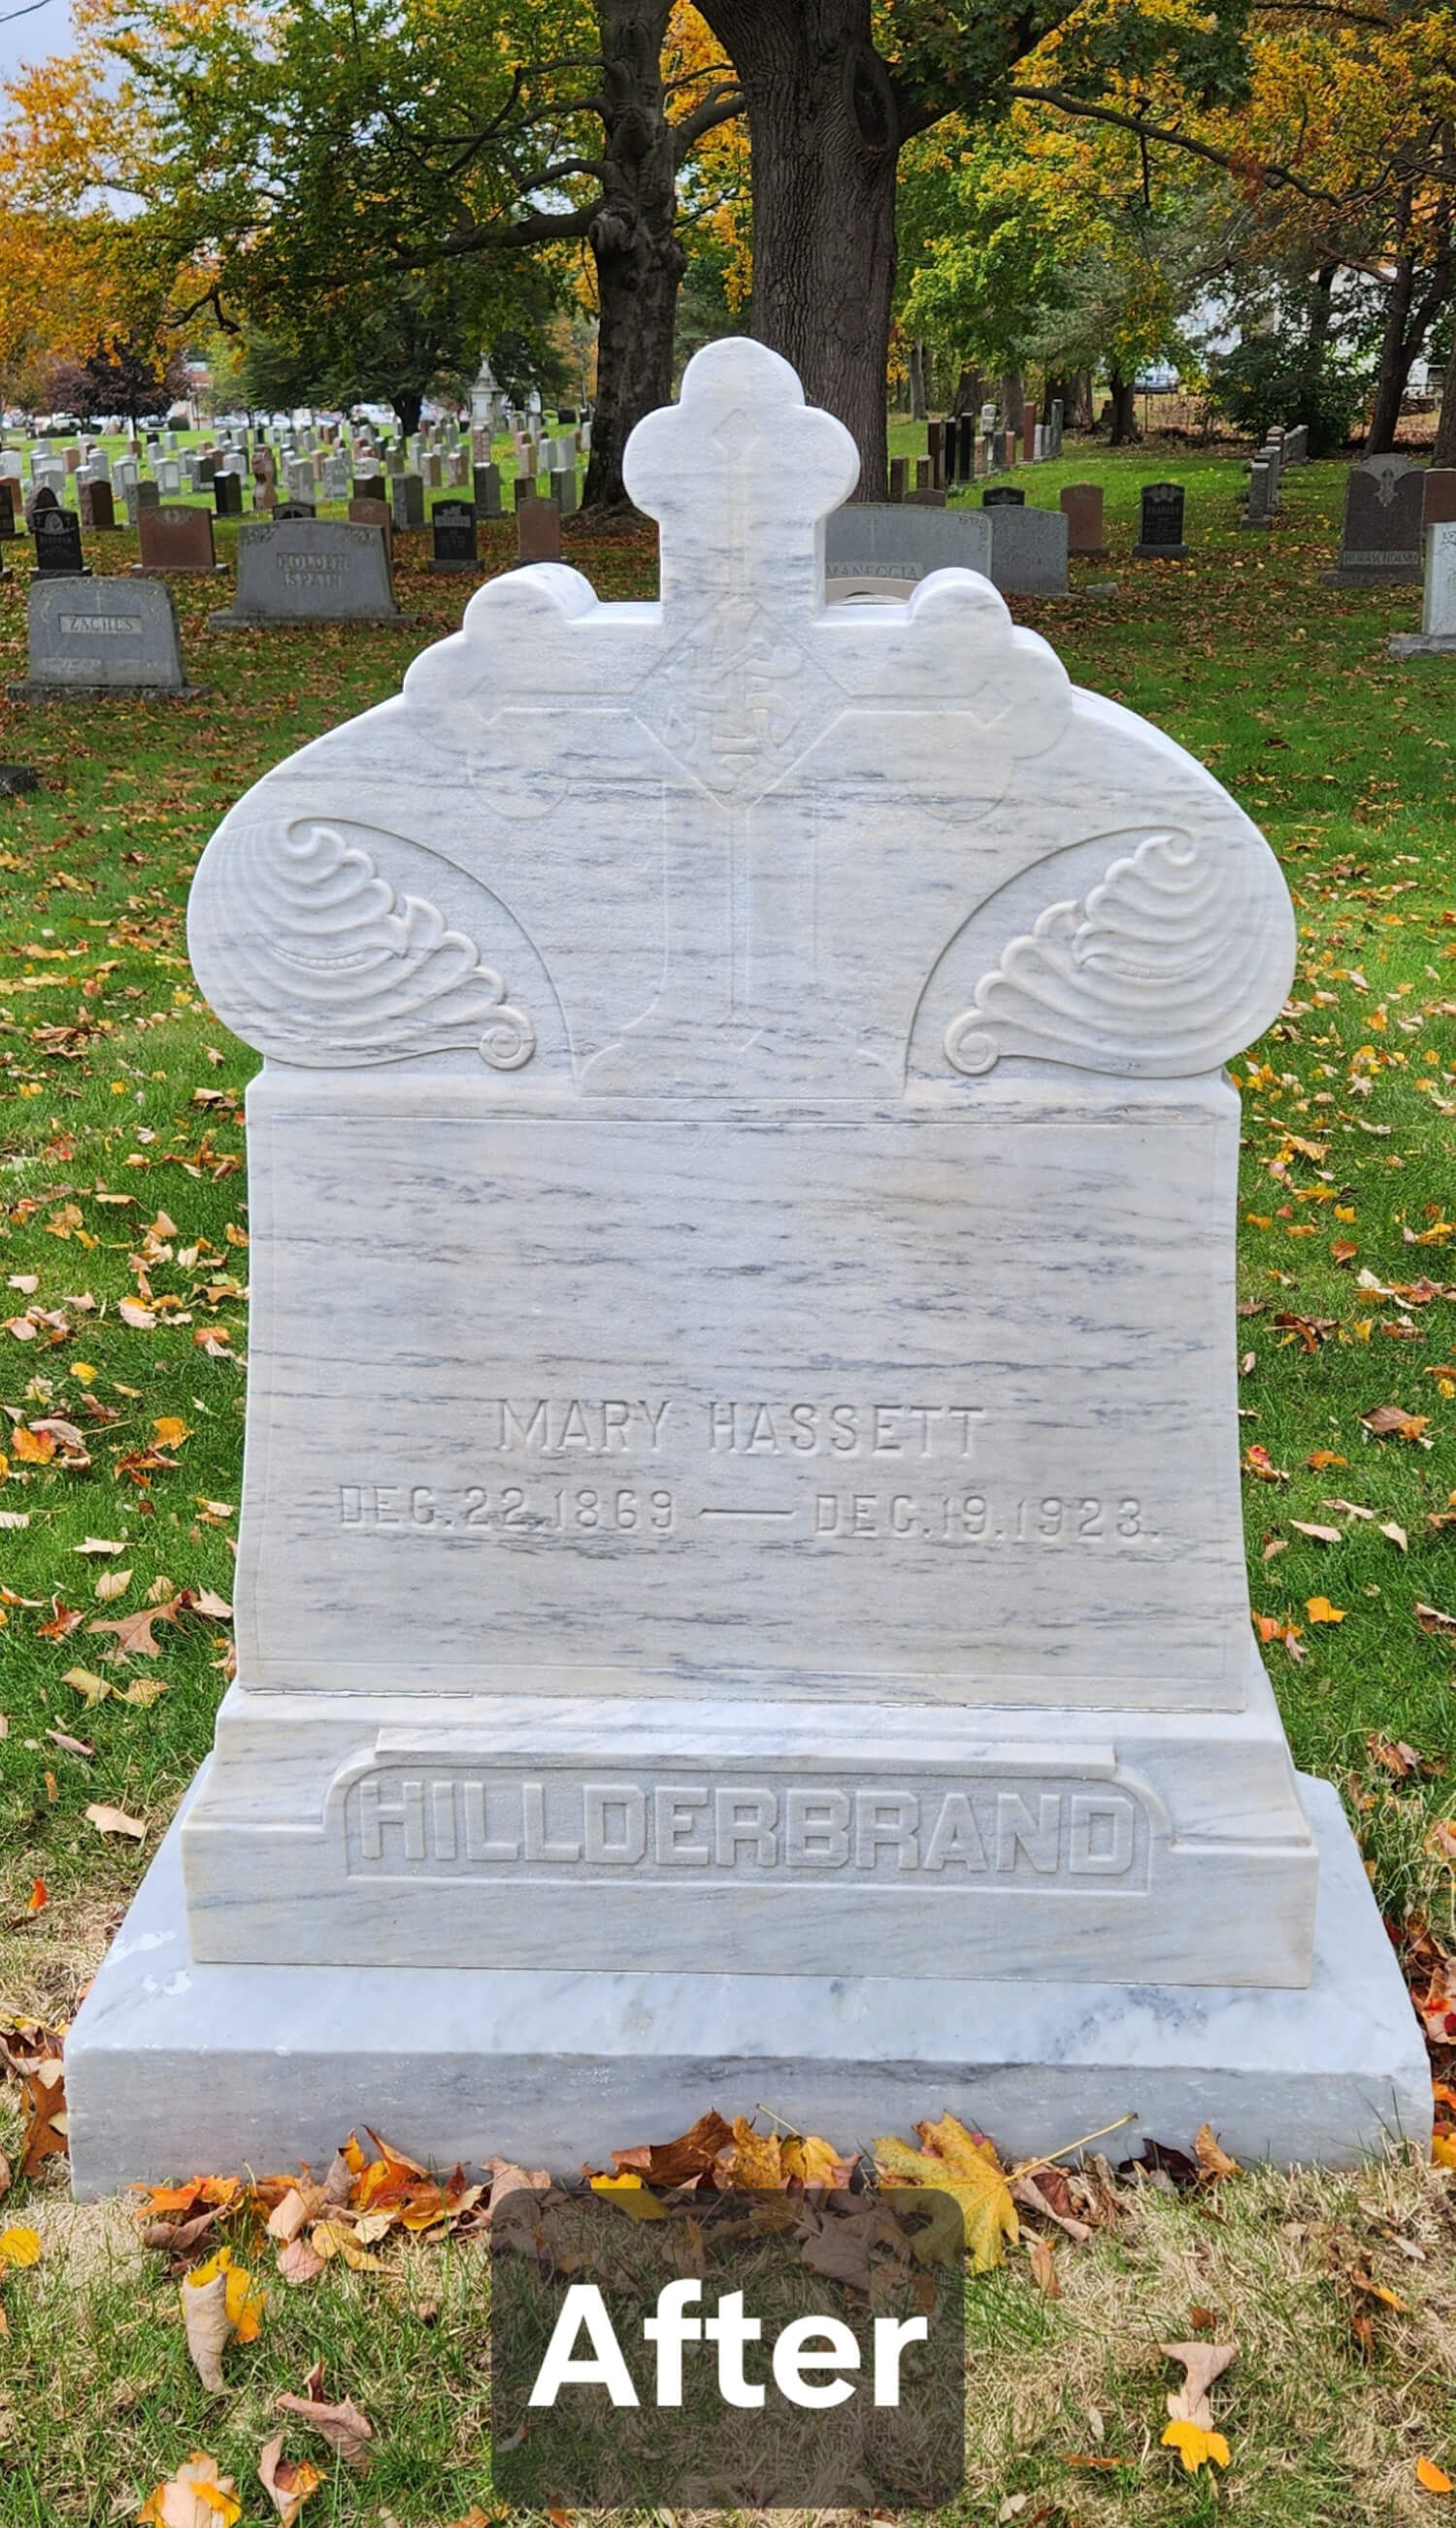 Headstone After